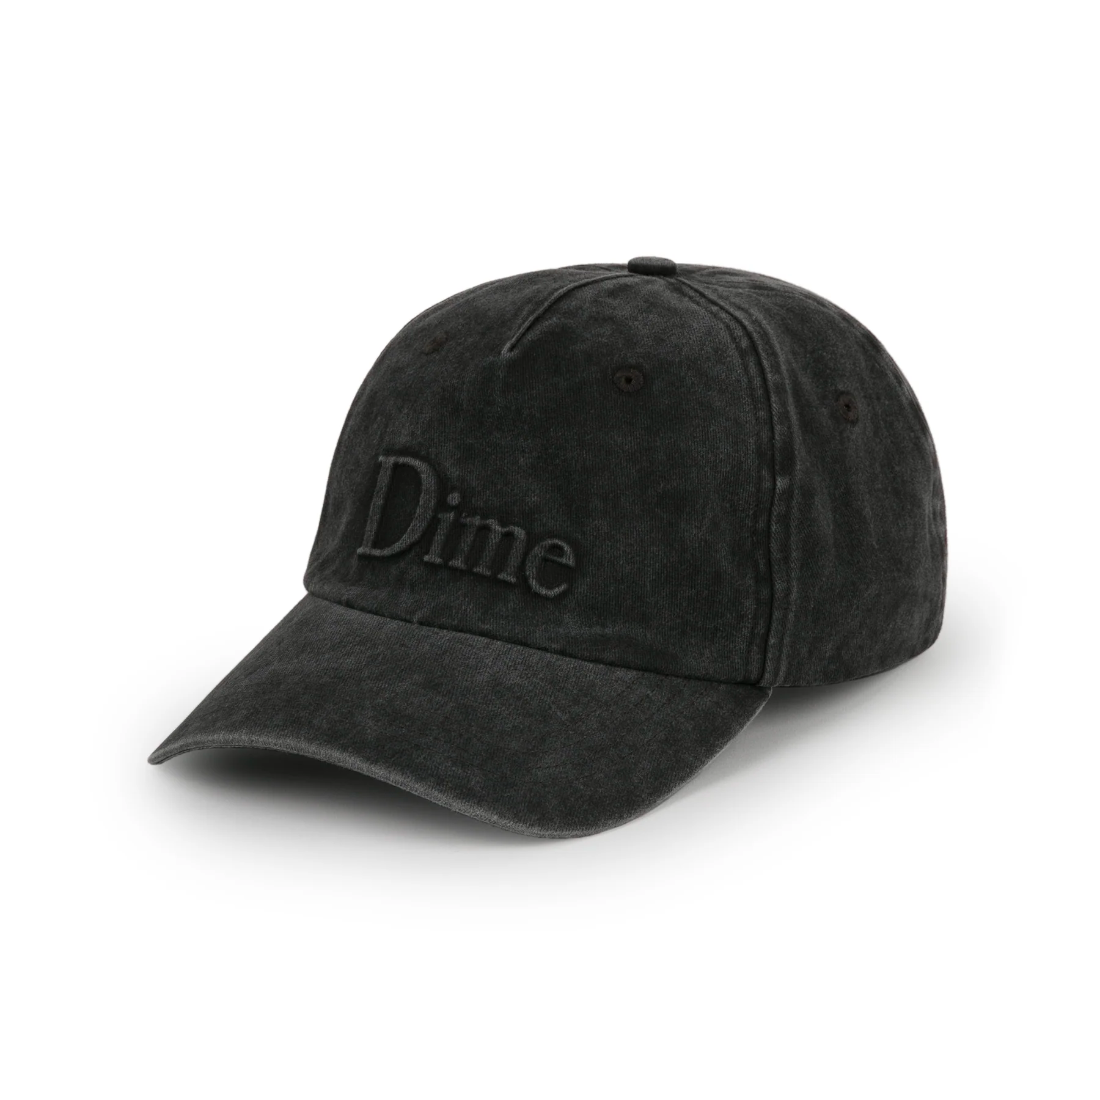 【Dime】Classic Embossed Uniform Cap - Charcoal washed